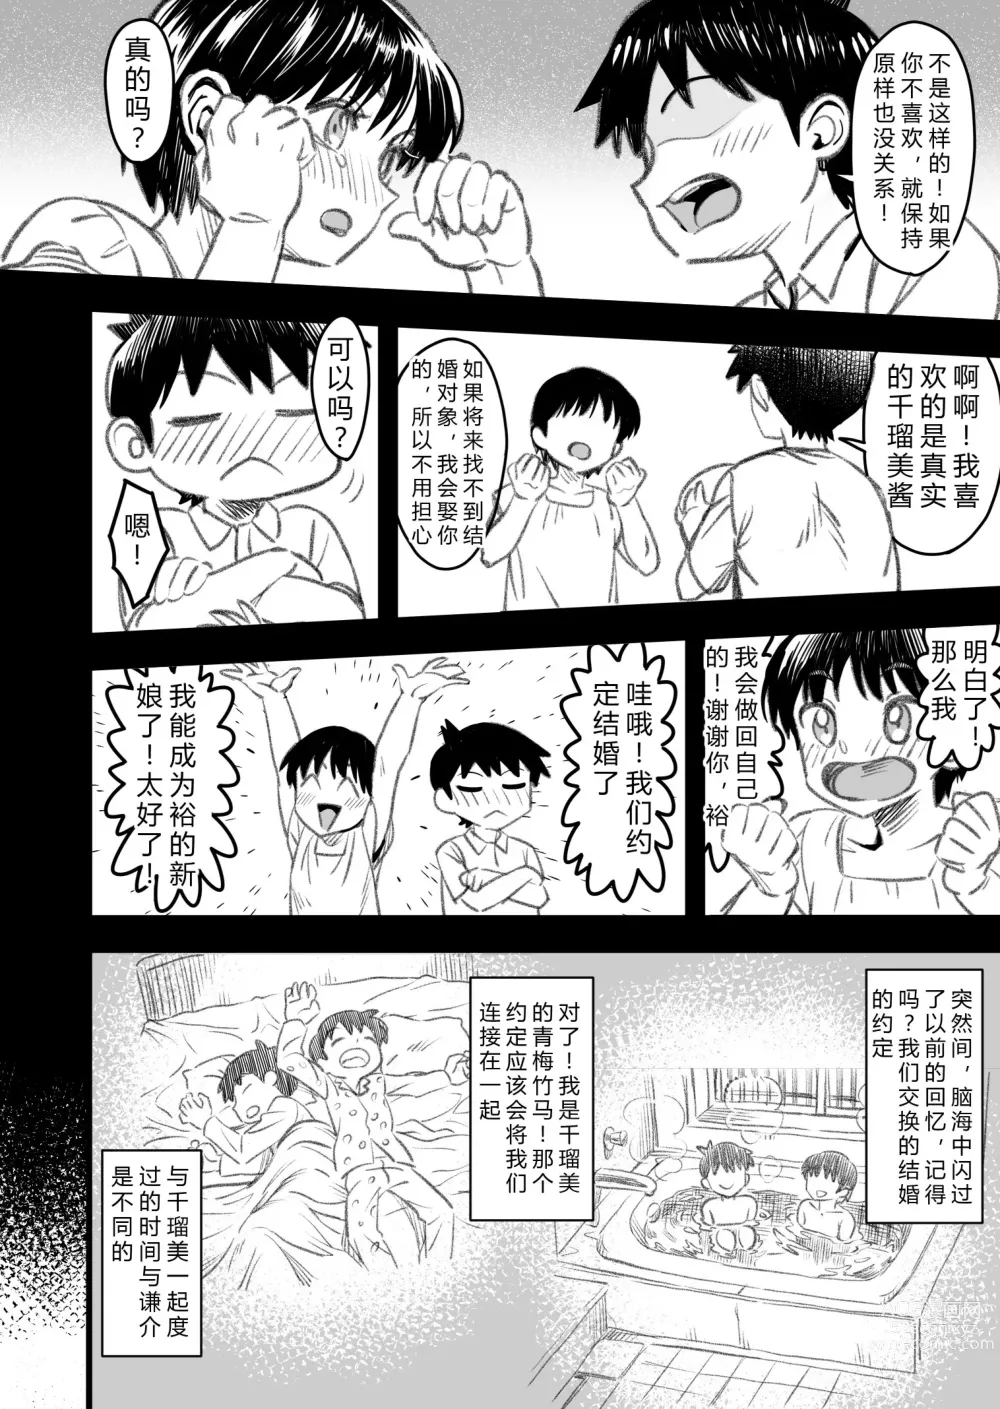 Page 14 of doujinshi How will the Protagonist's Brain be destroyed?